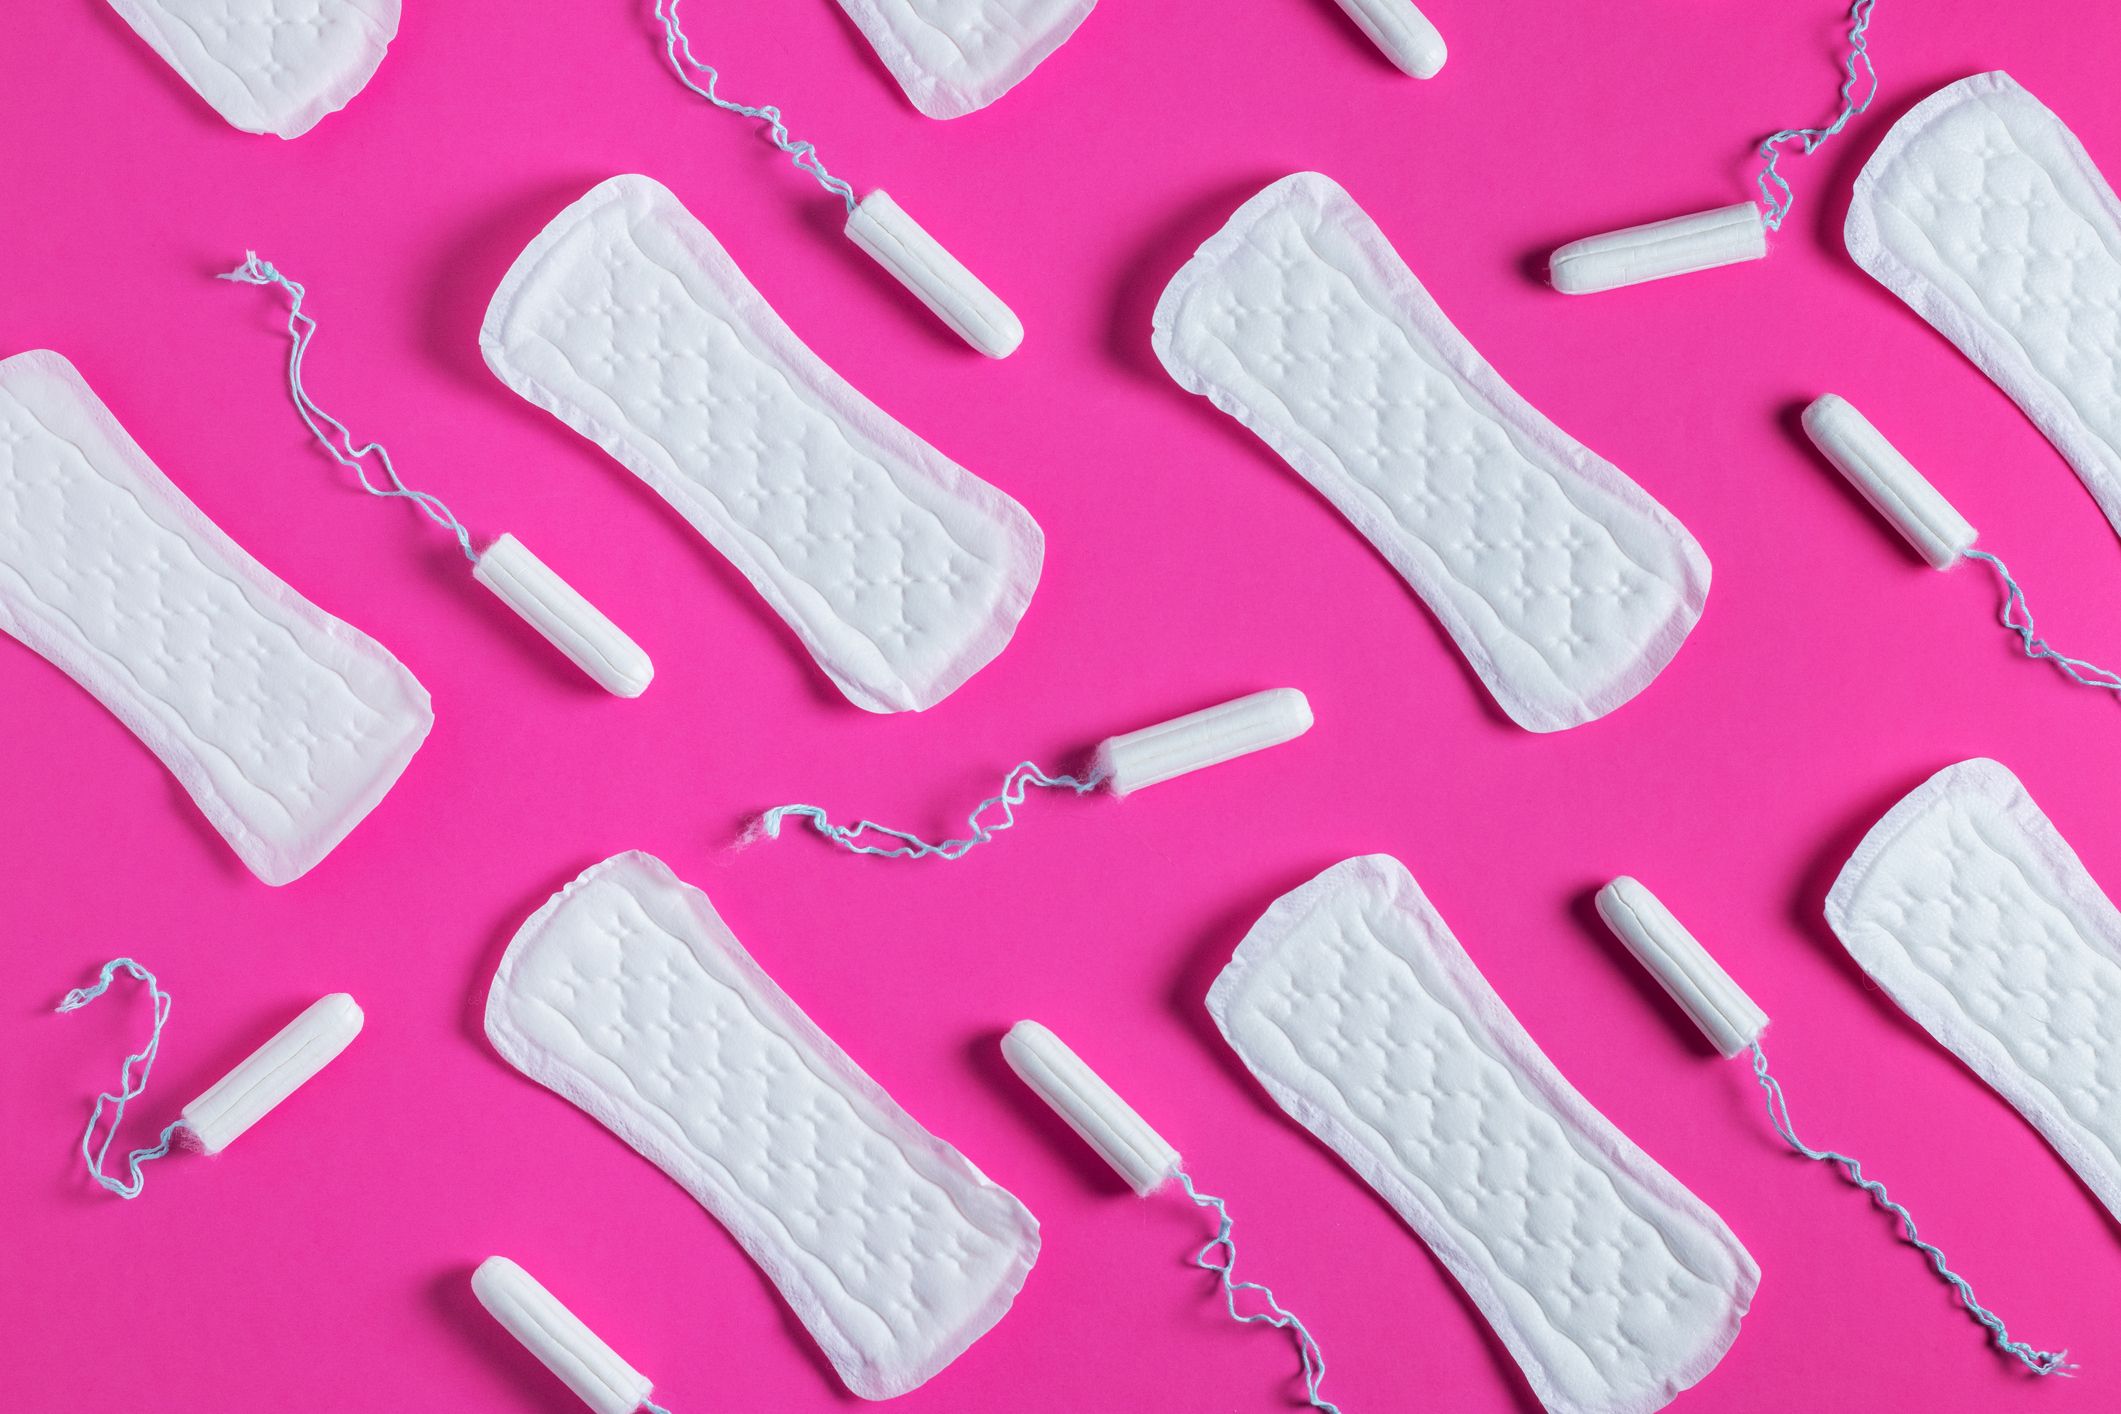 Why Everyone Is Mad at the Feminist Company That Makes Period Underwear